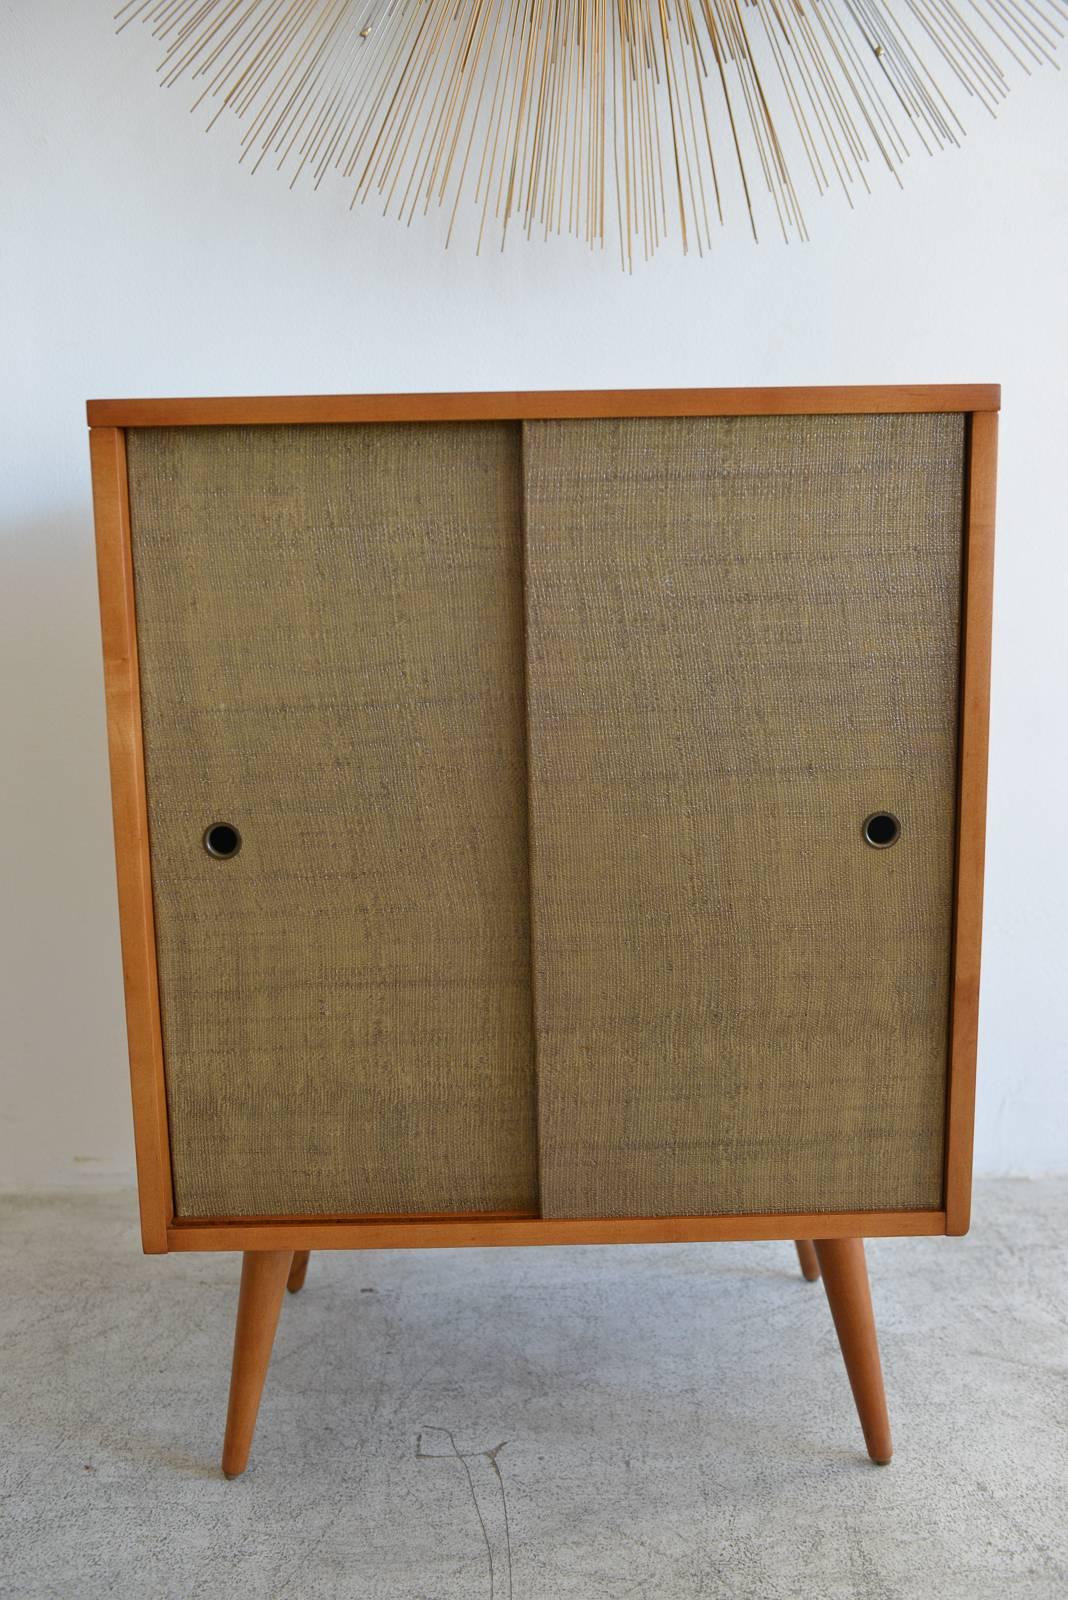 Paul McCobb planner group small cabinet, circa 1955. Maple with original grass cloth sliding doors. Perfect by itself or as a compliment to the larger cabinet available in a separate listing. Professionally restored wood in showroom